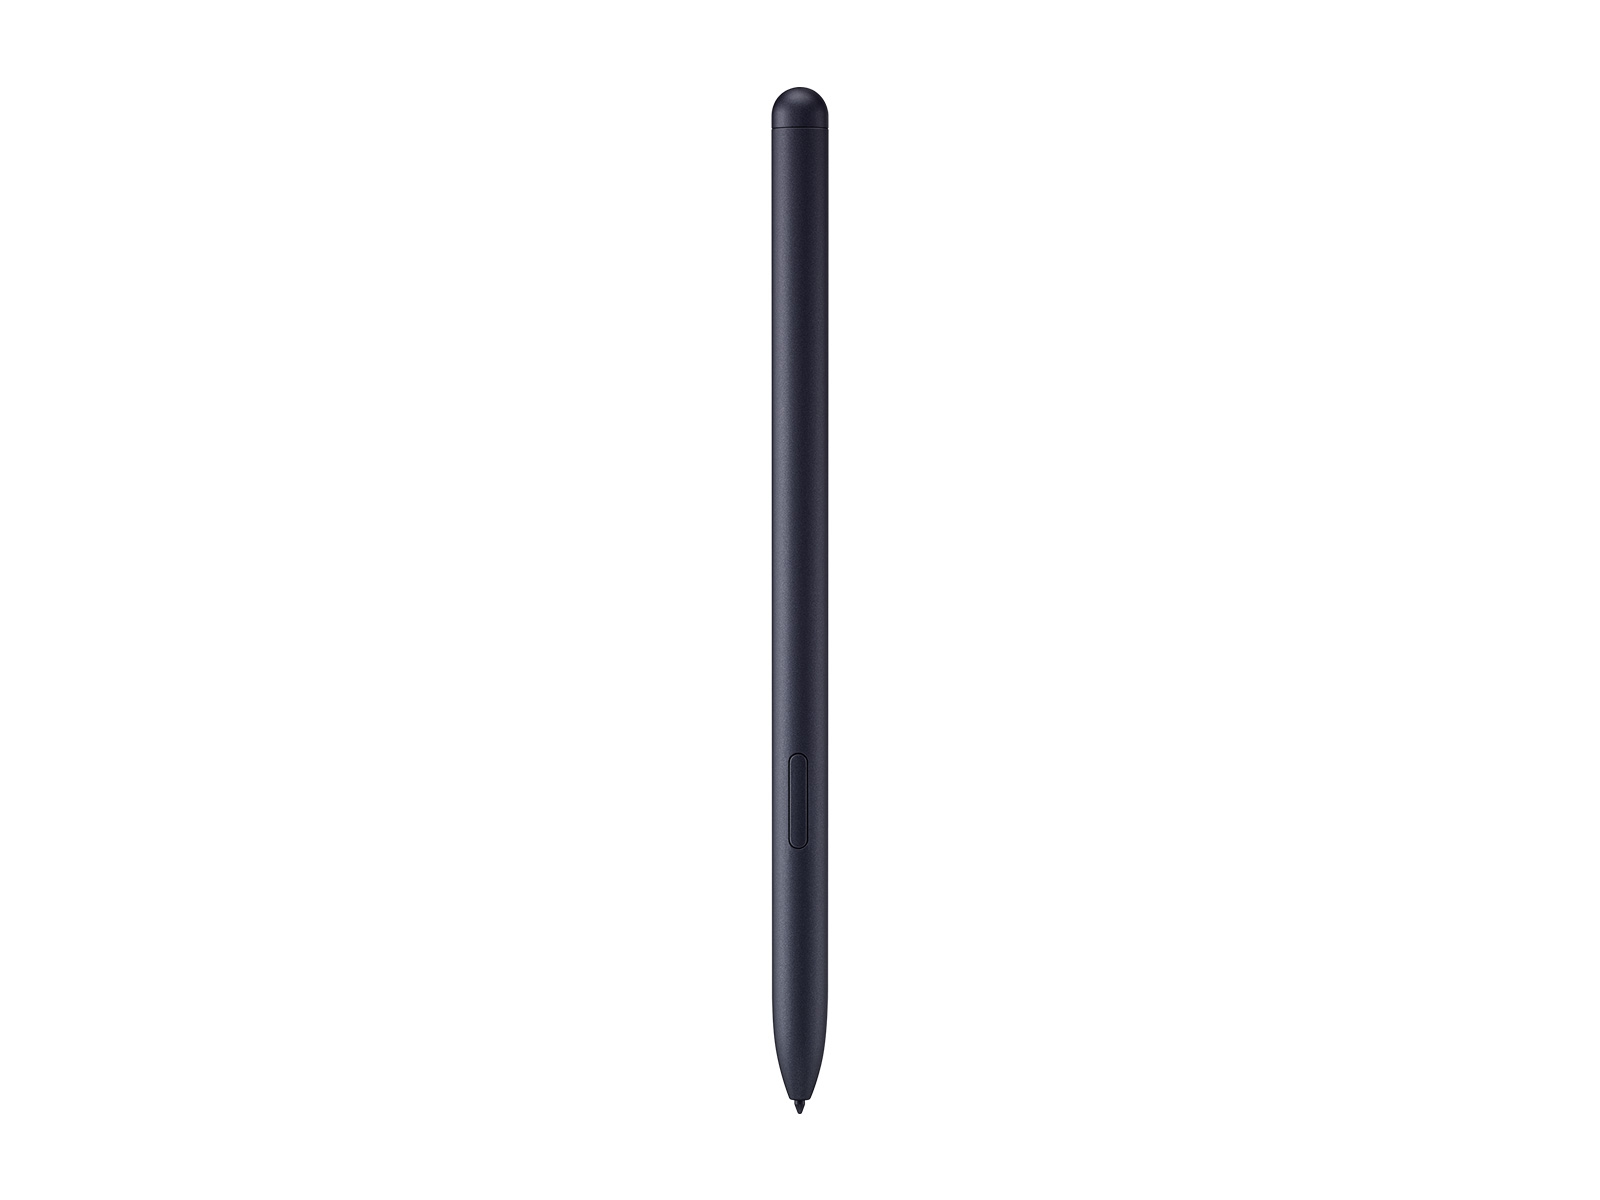 Galaxy Tab S8/S8+/S8 S Pen Mobile Accessories - | Samsung US